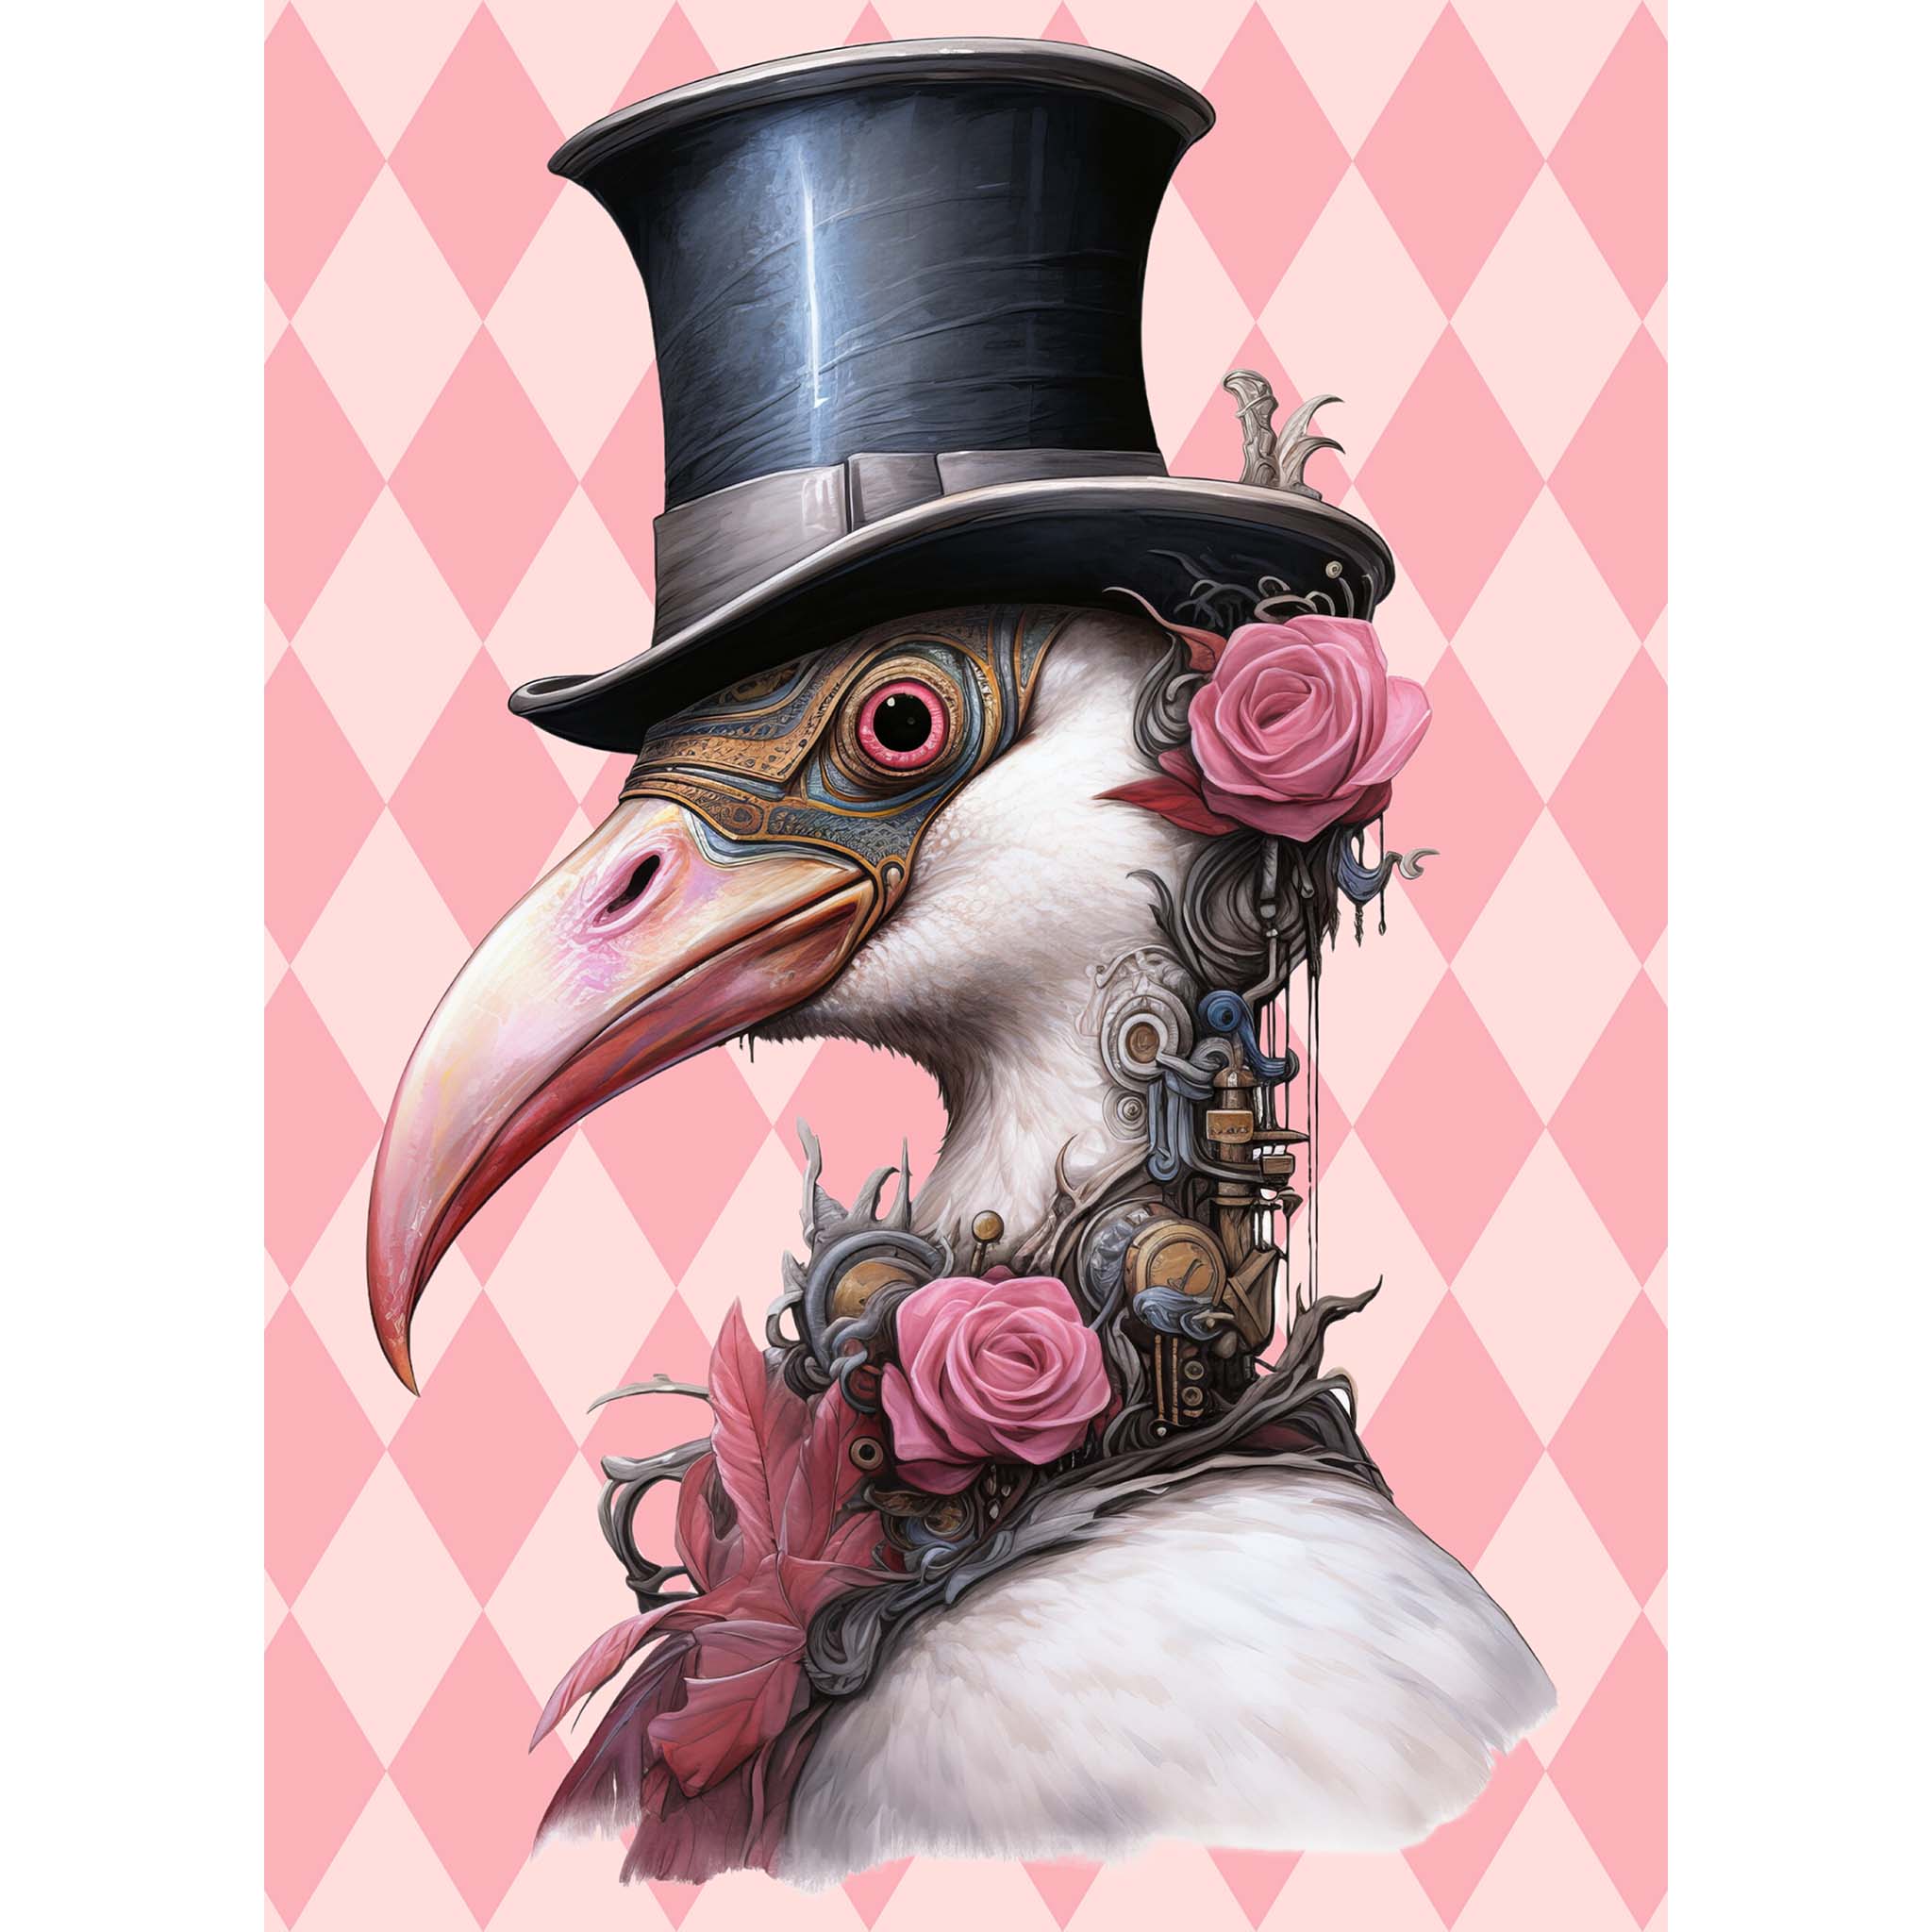 Tissue paper design featuring a playful and whimsical fluffy white flamingo donning a steampunk tophat against a vibrant pink harlequin backdrop. White borders are on the sides.